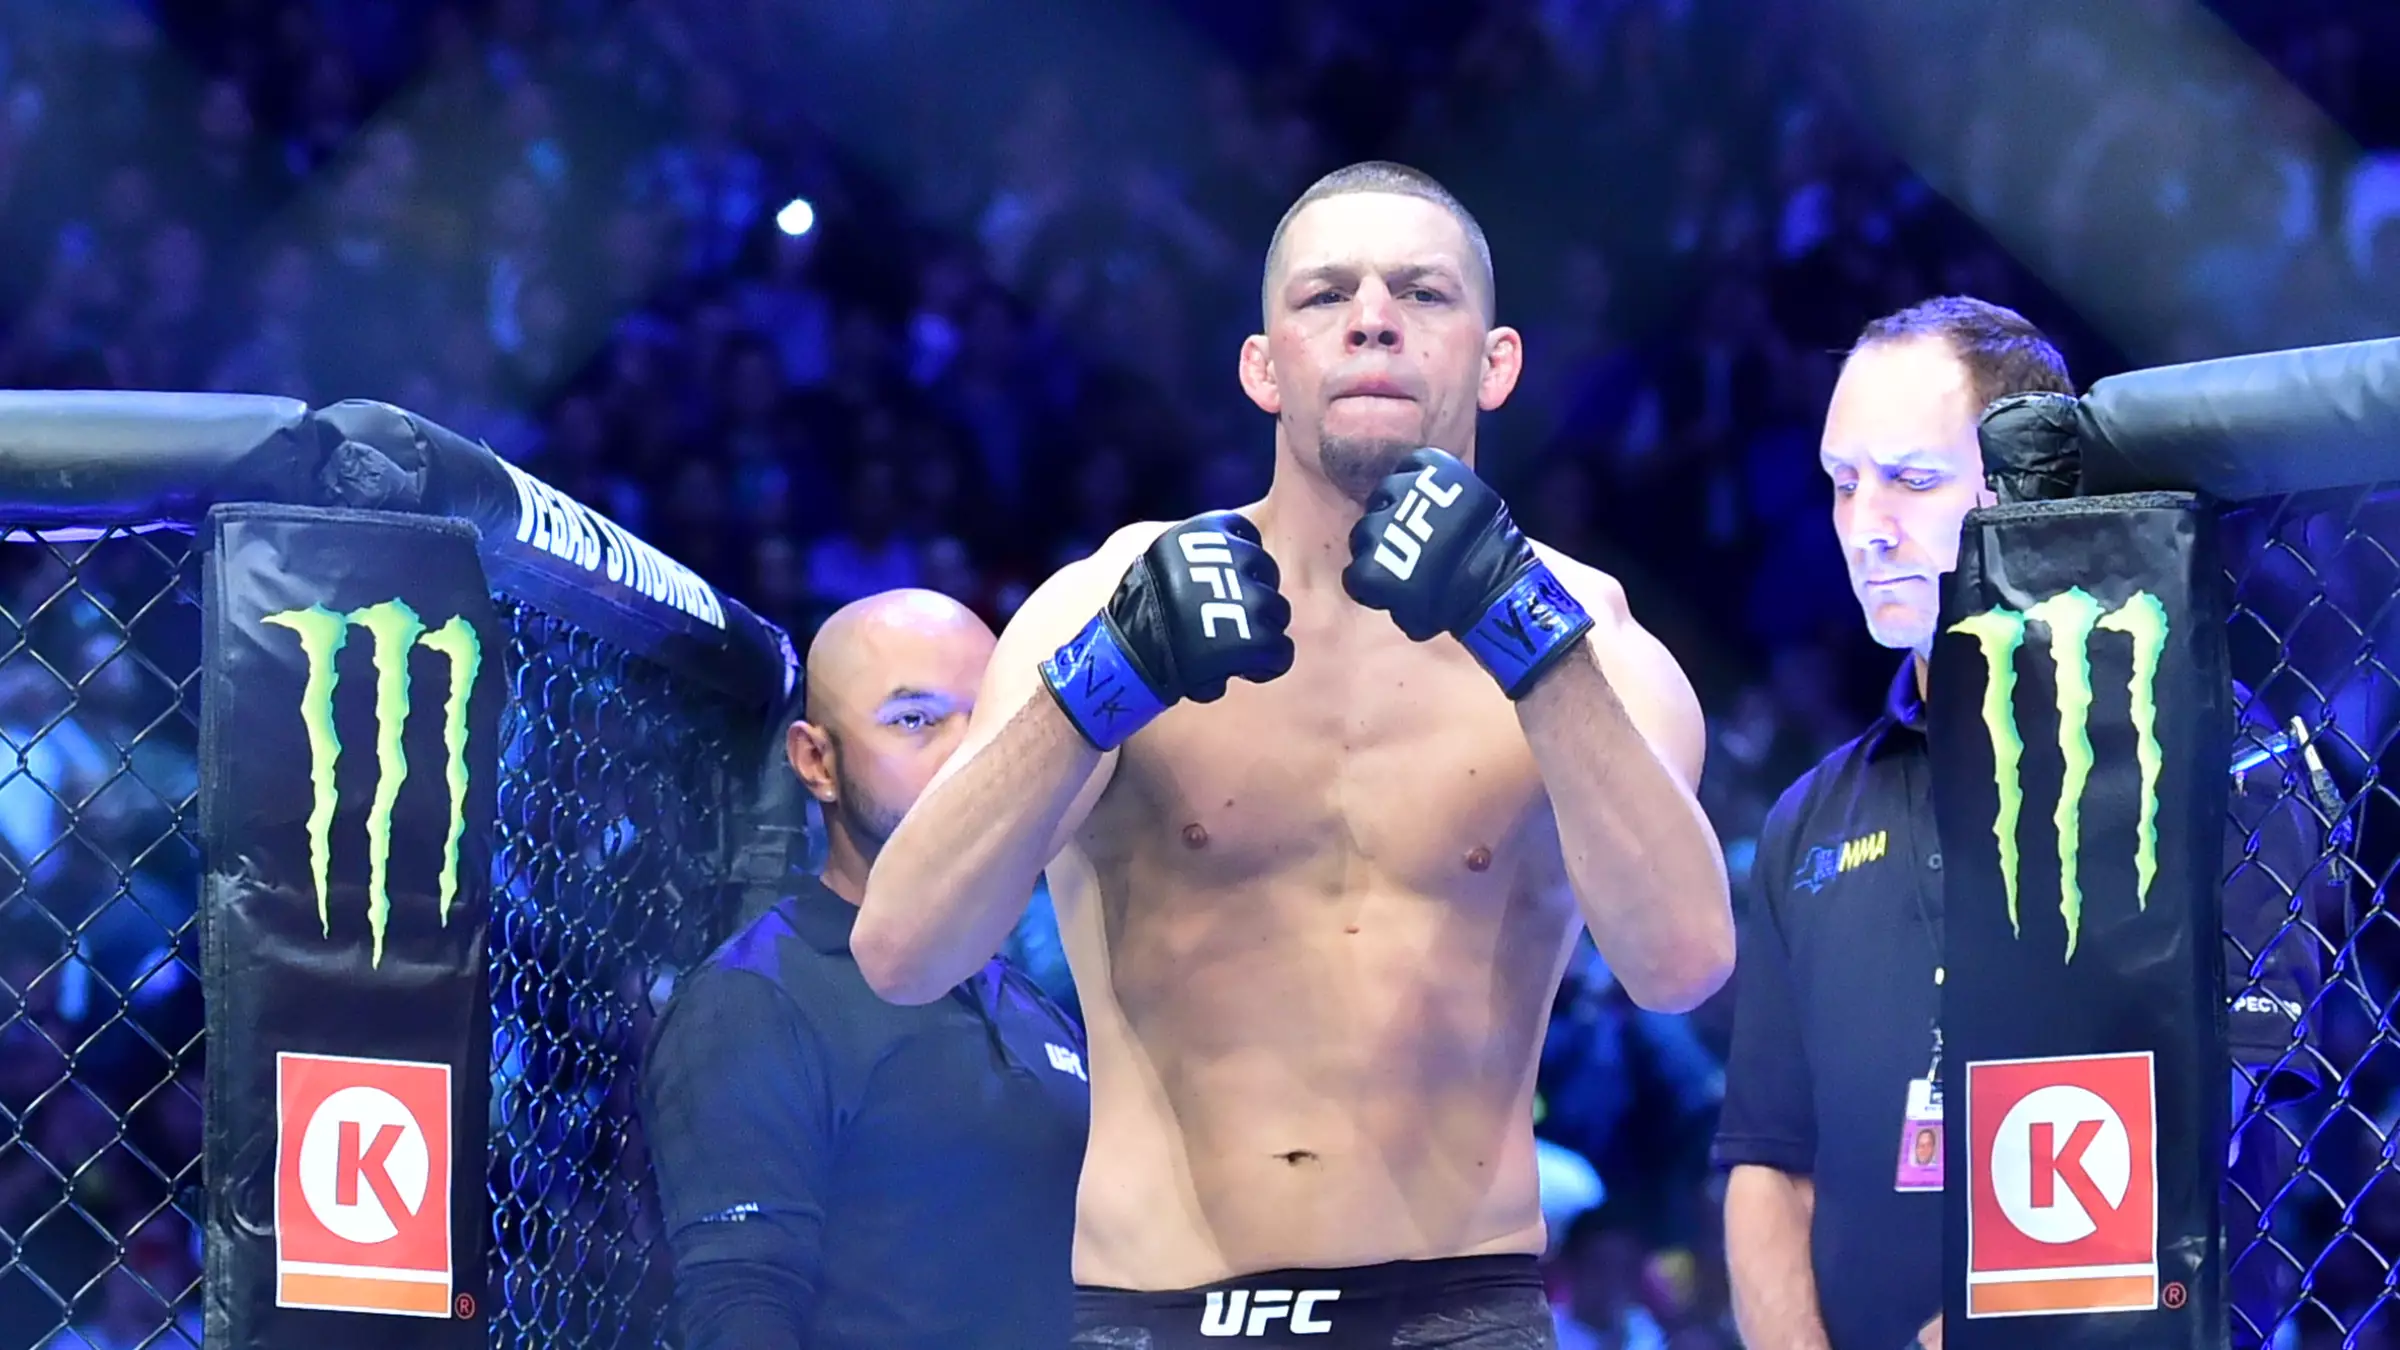 Nate Diaz Appears To Announce Retirement In Tweet After Controversial Loss To Jorge Masvidal At UFC 244